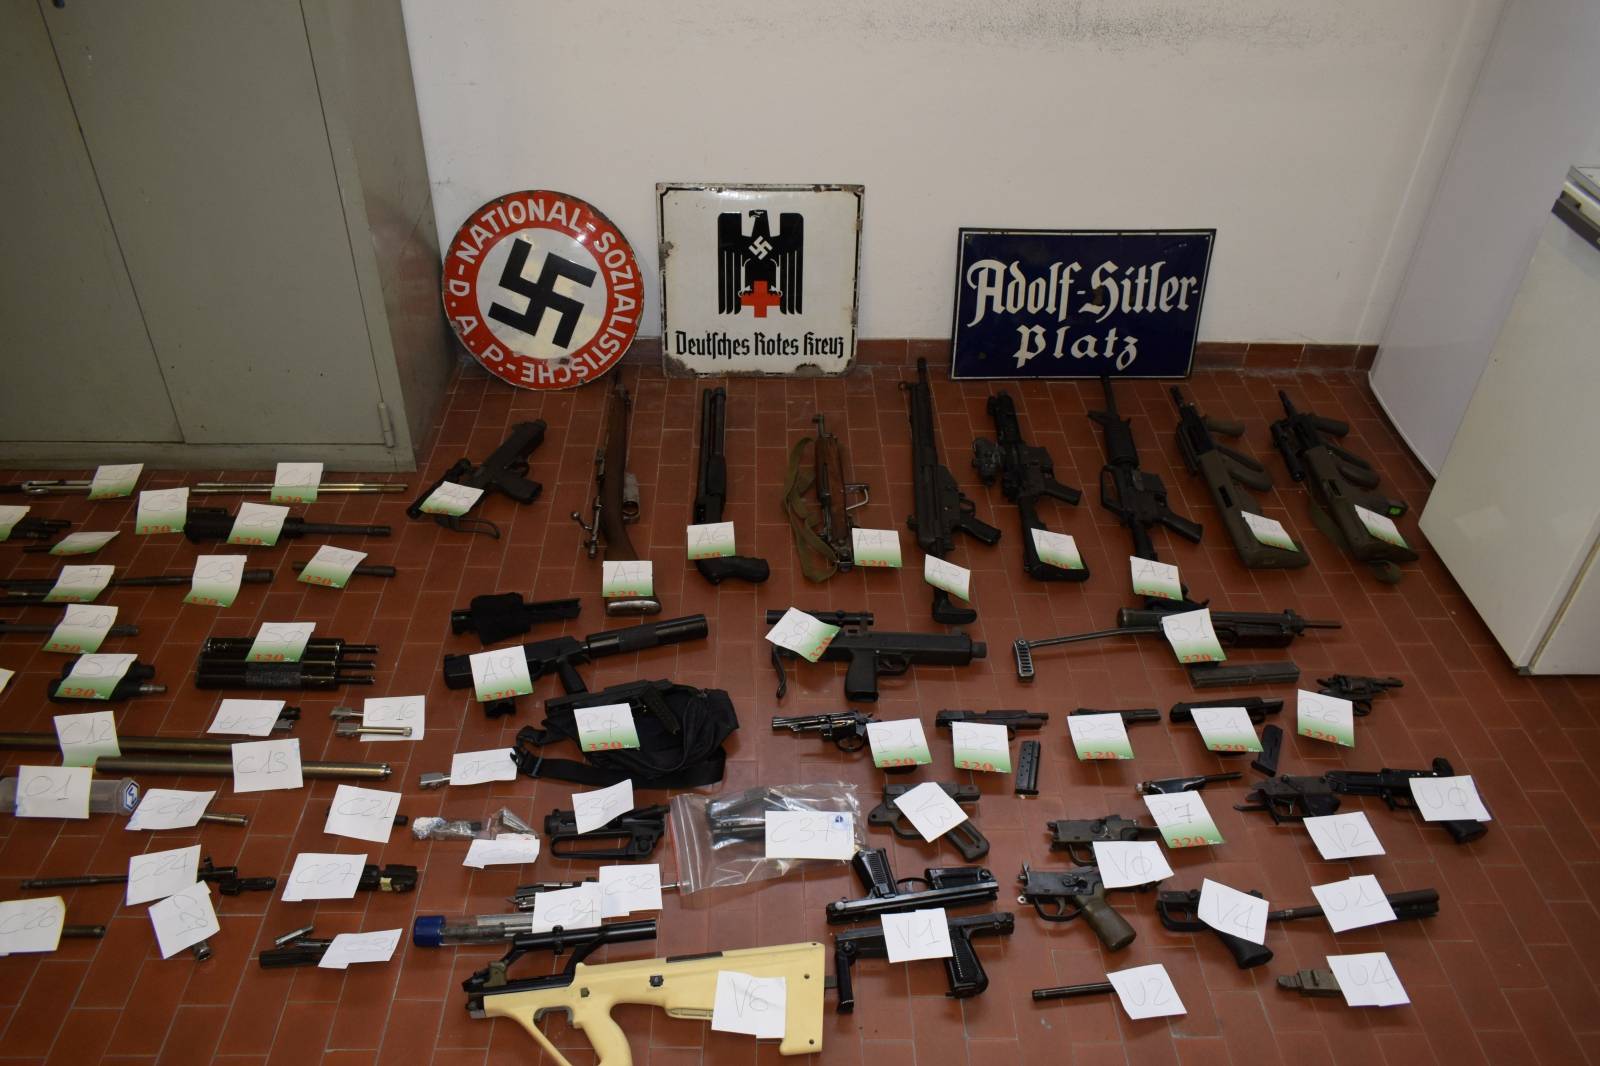 Italian Police handout shows weapons seized in raids on neo-Nazi sympathisers, in Turin